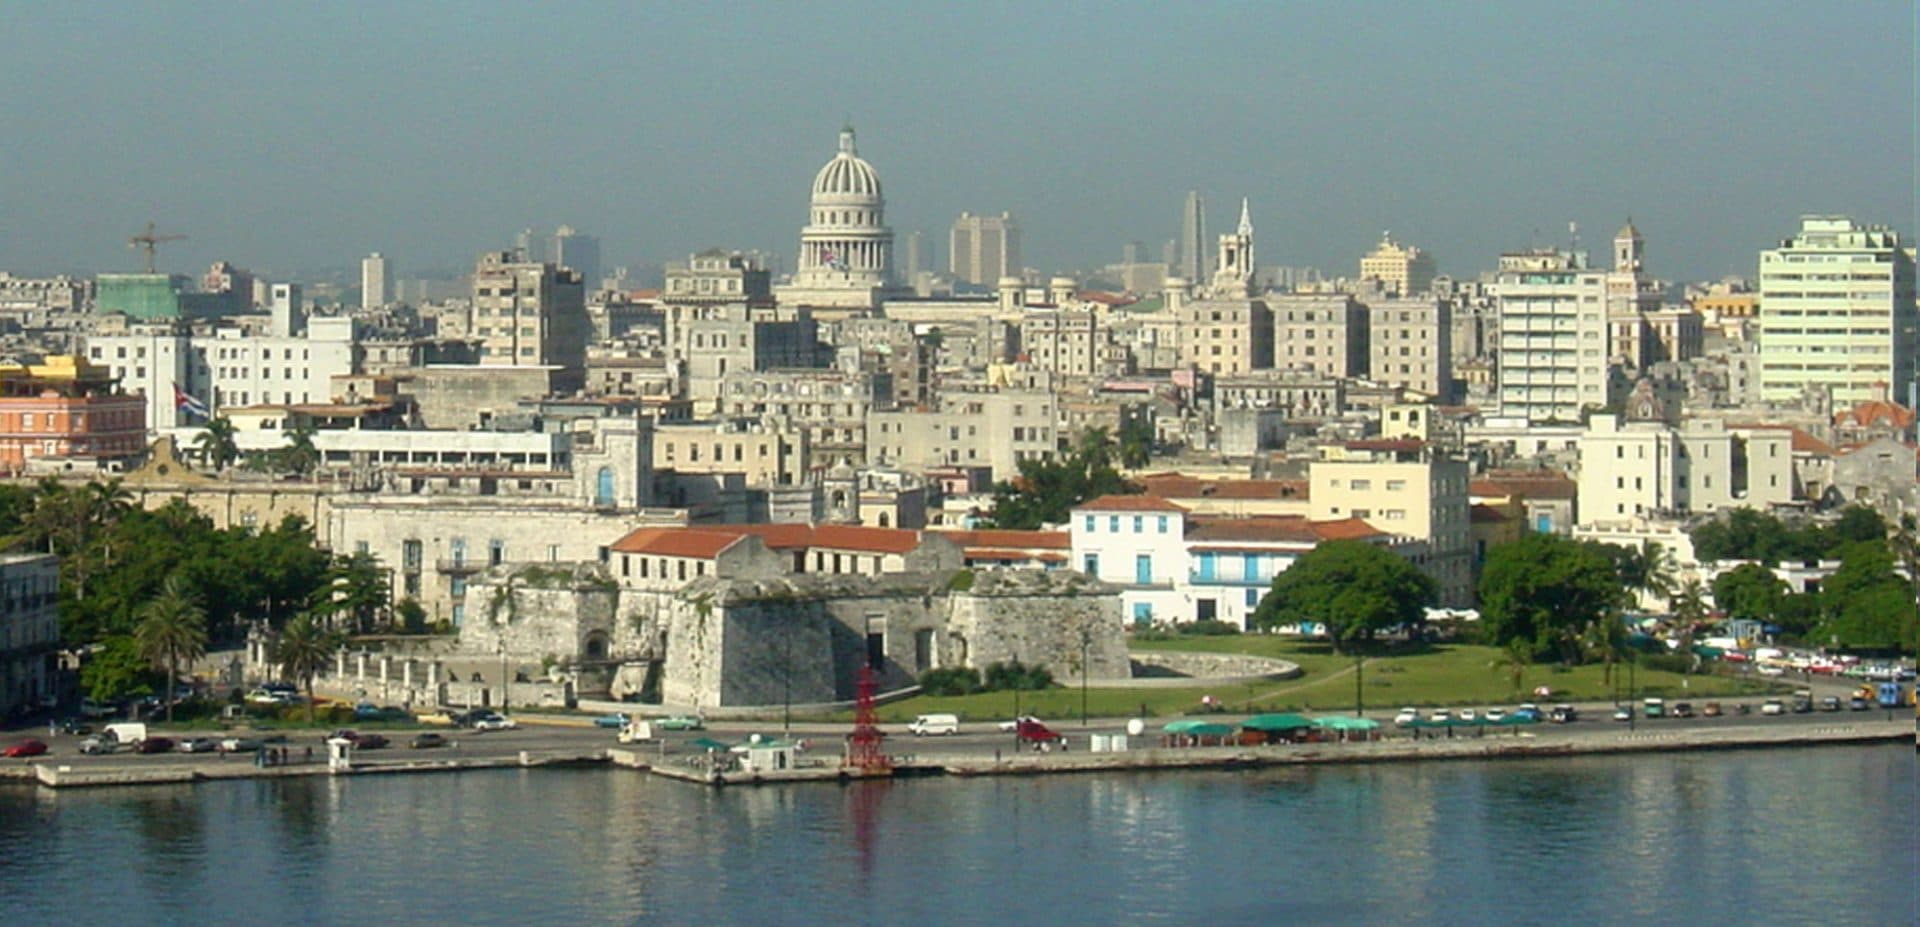 Charting a New Course for U.S. Business in Cuba